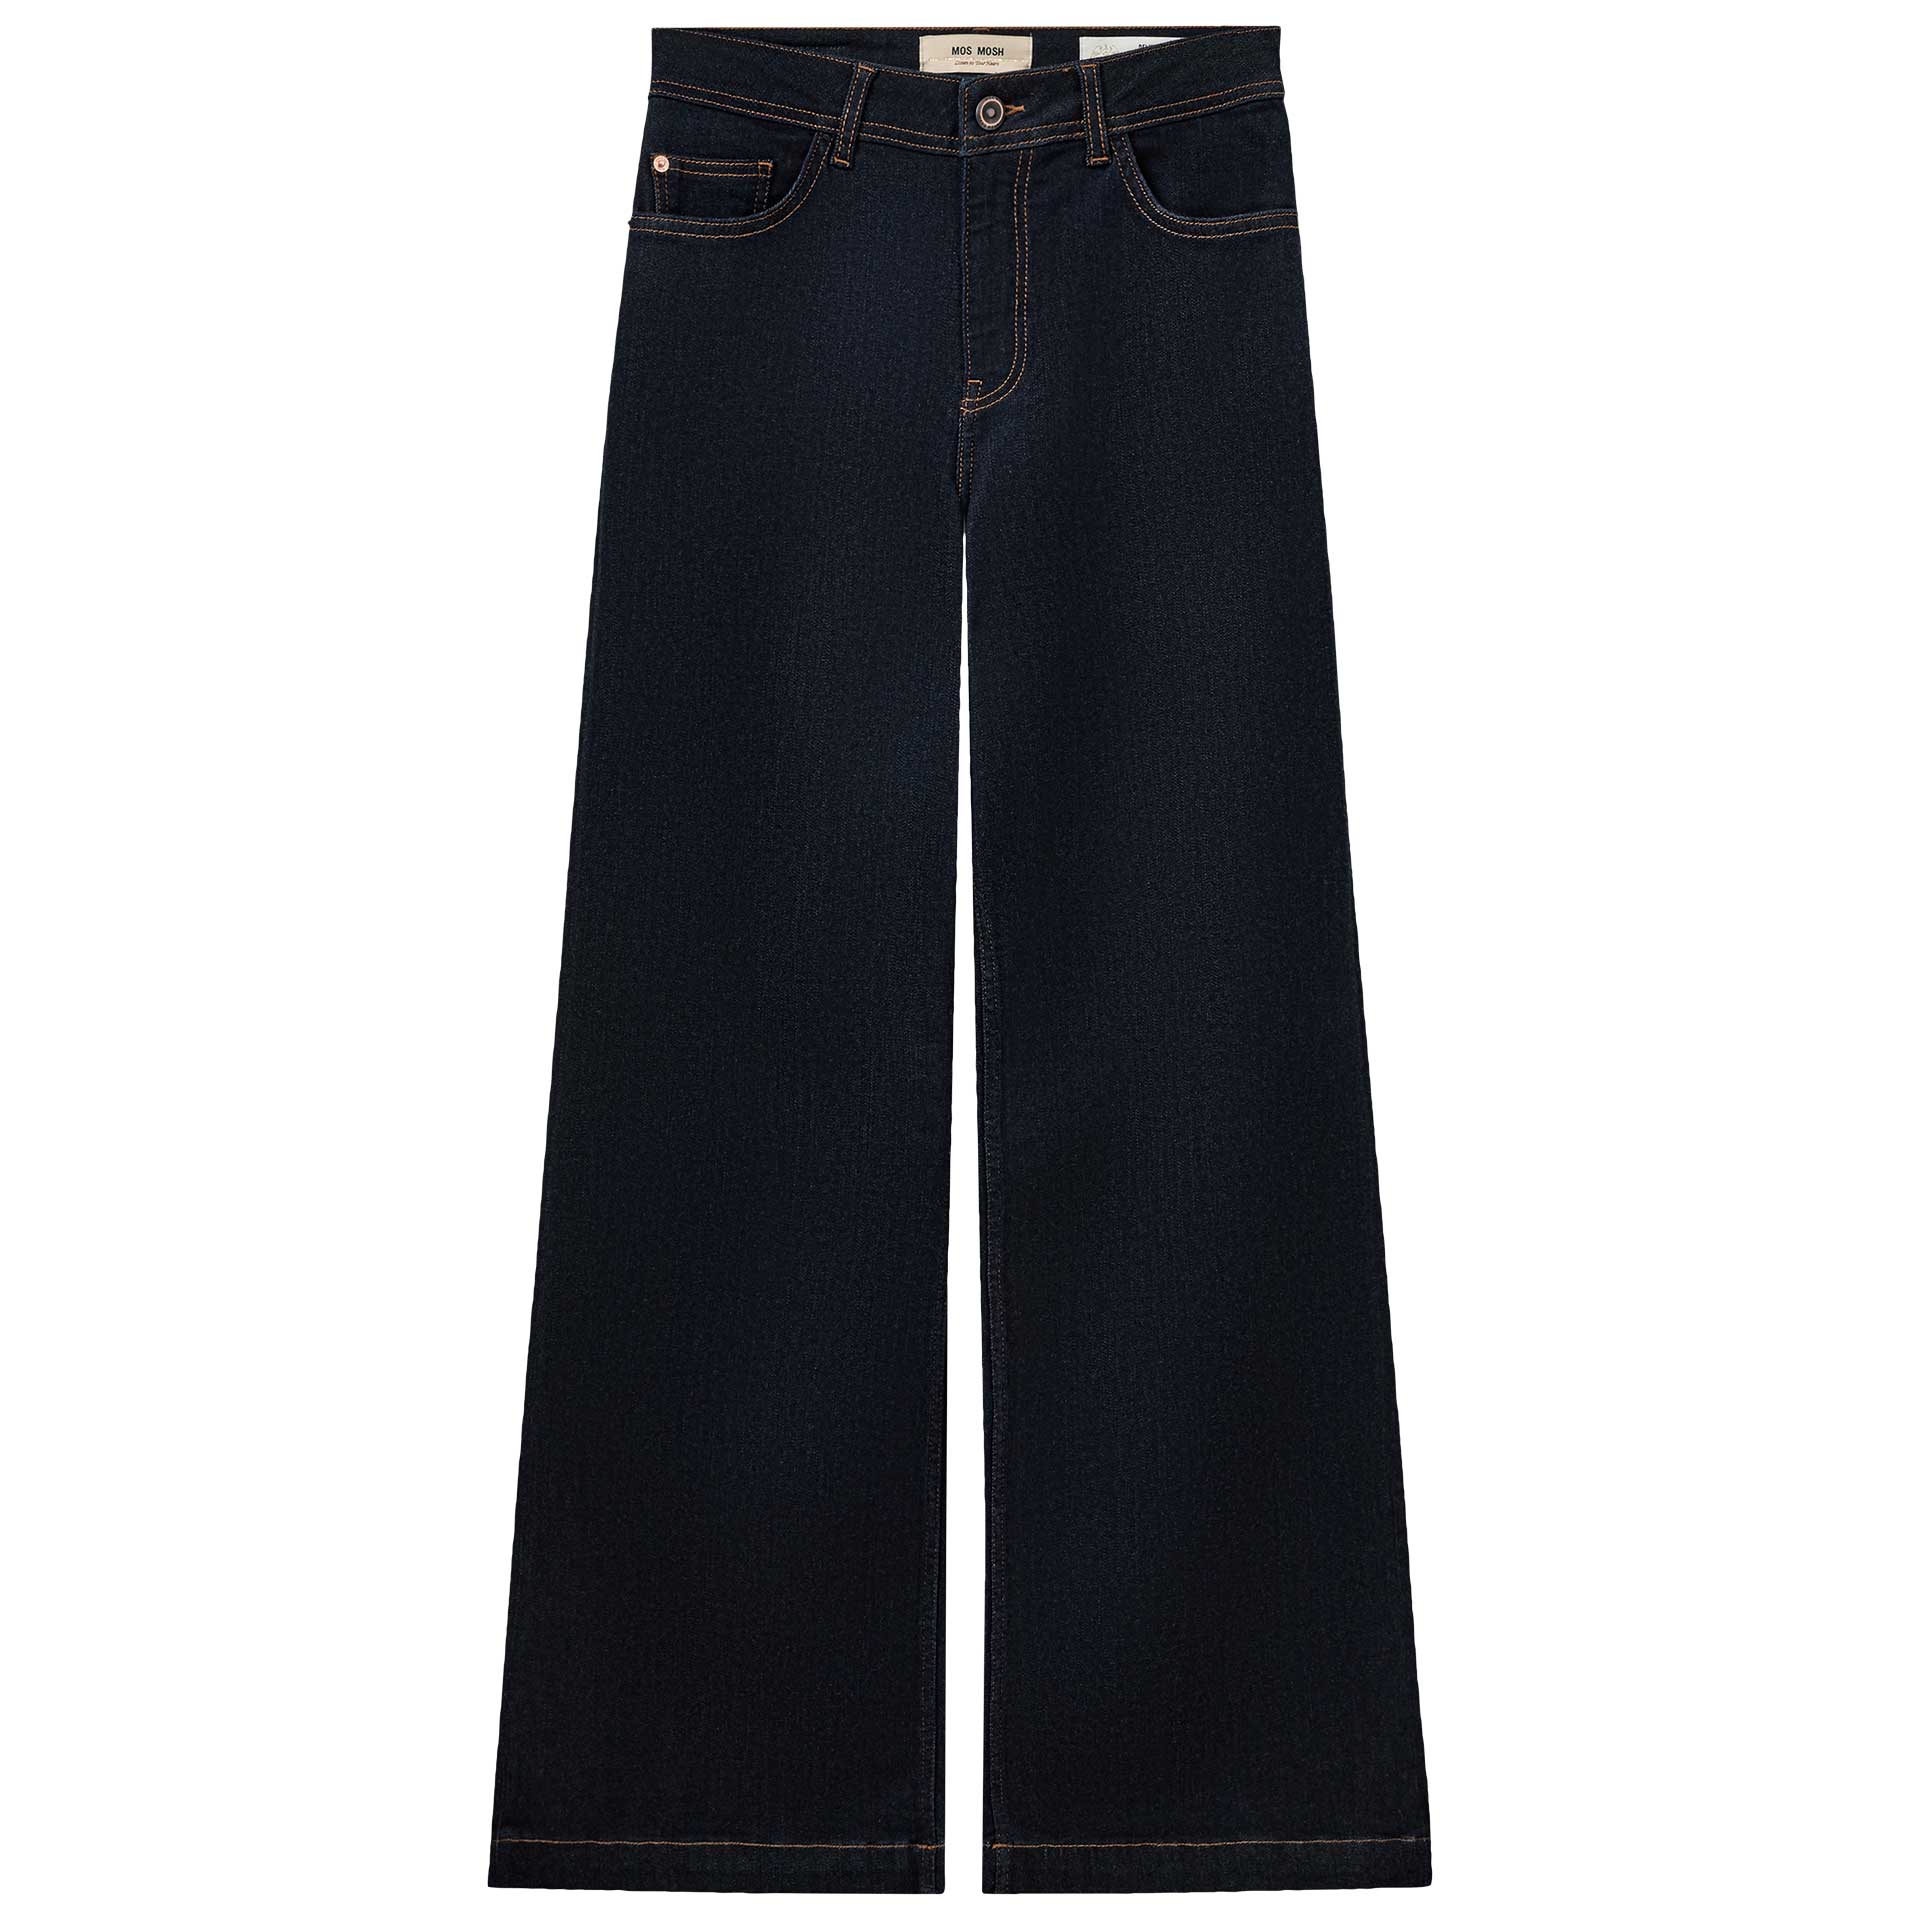 Mos Mosh Jeans Dara Deluxe